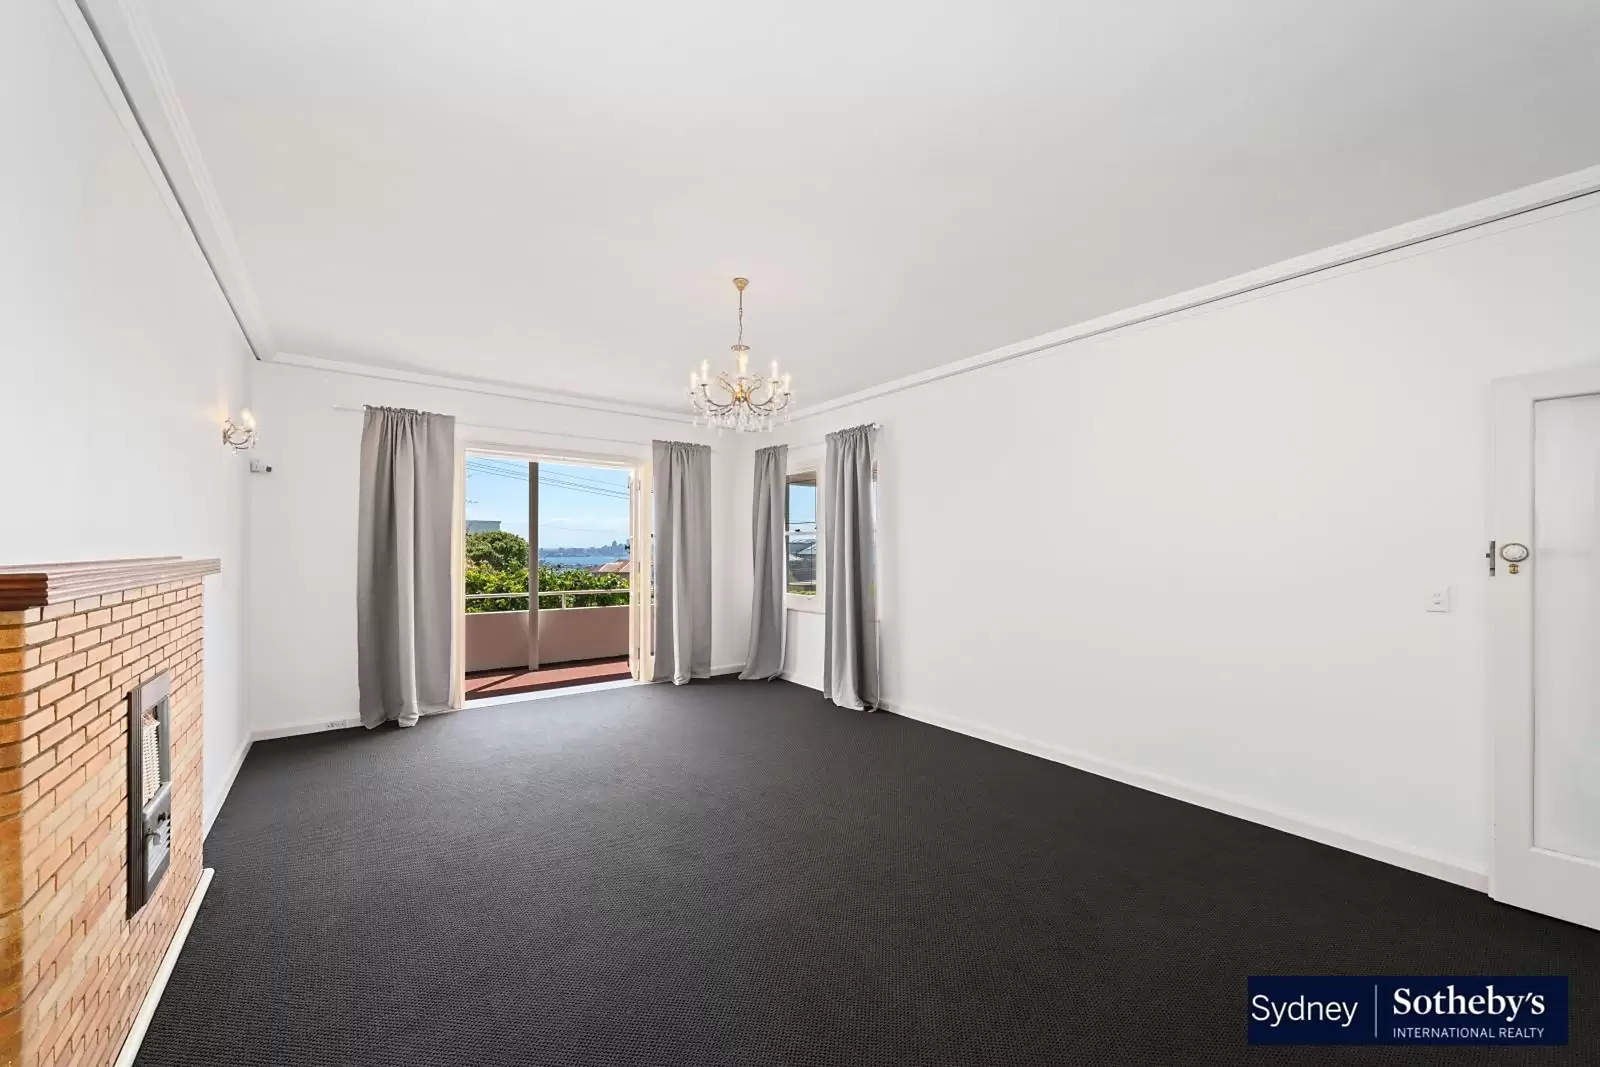 2 Wallangra Road, Dover Heights Leased by Sydney Sotheby's International Realty - image 4